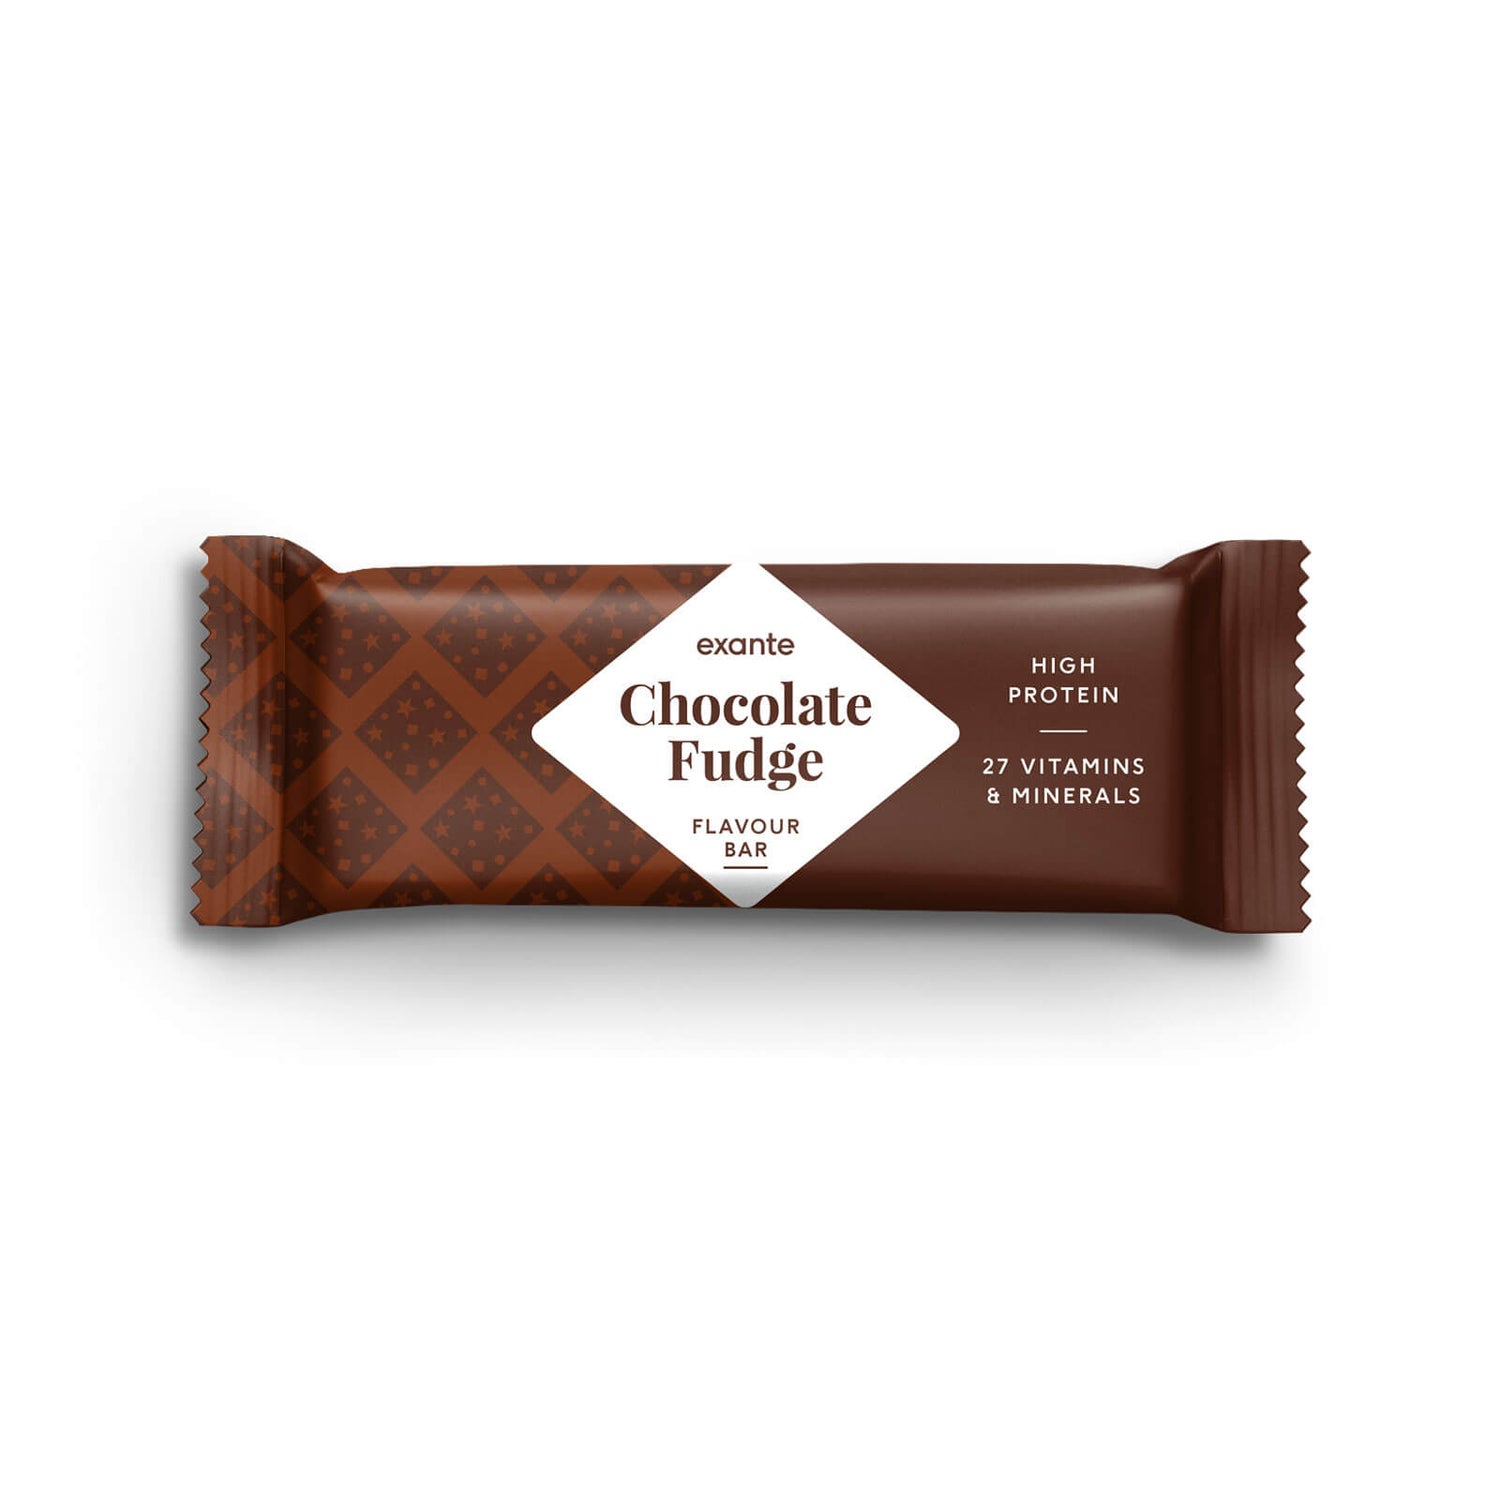 Chocolate Fudge Flavour Meal Replacement Bar